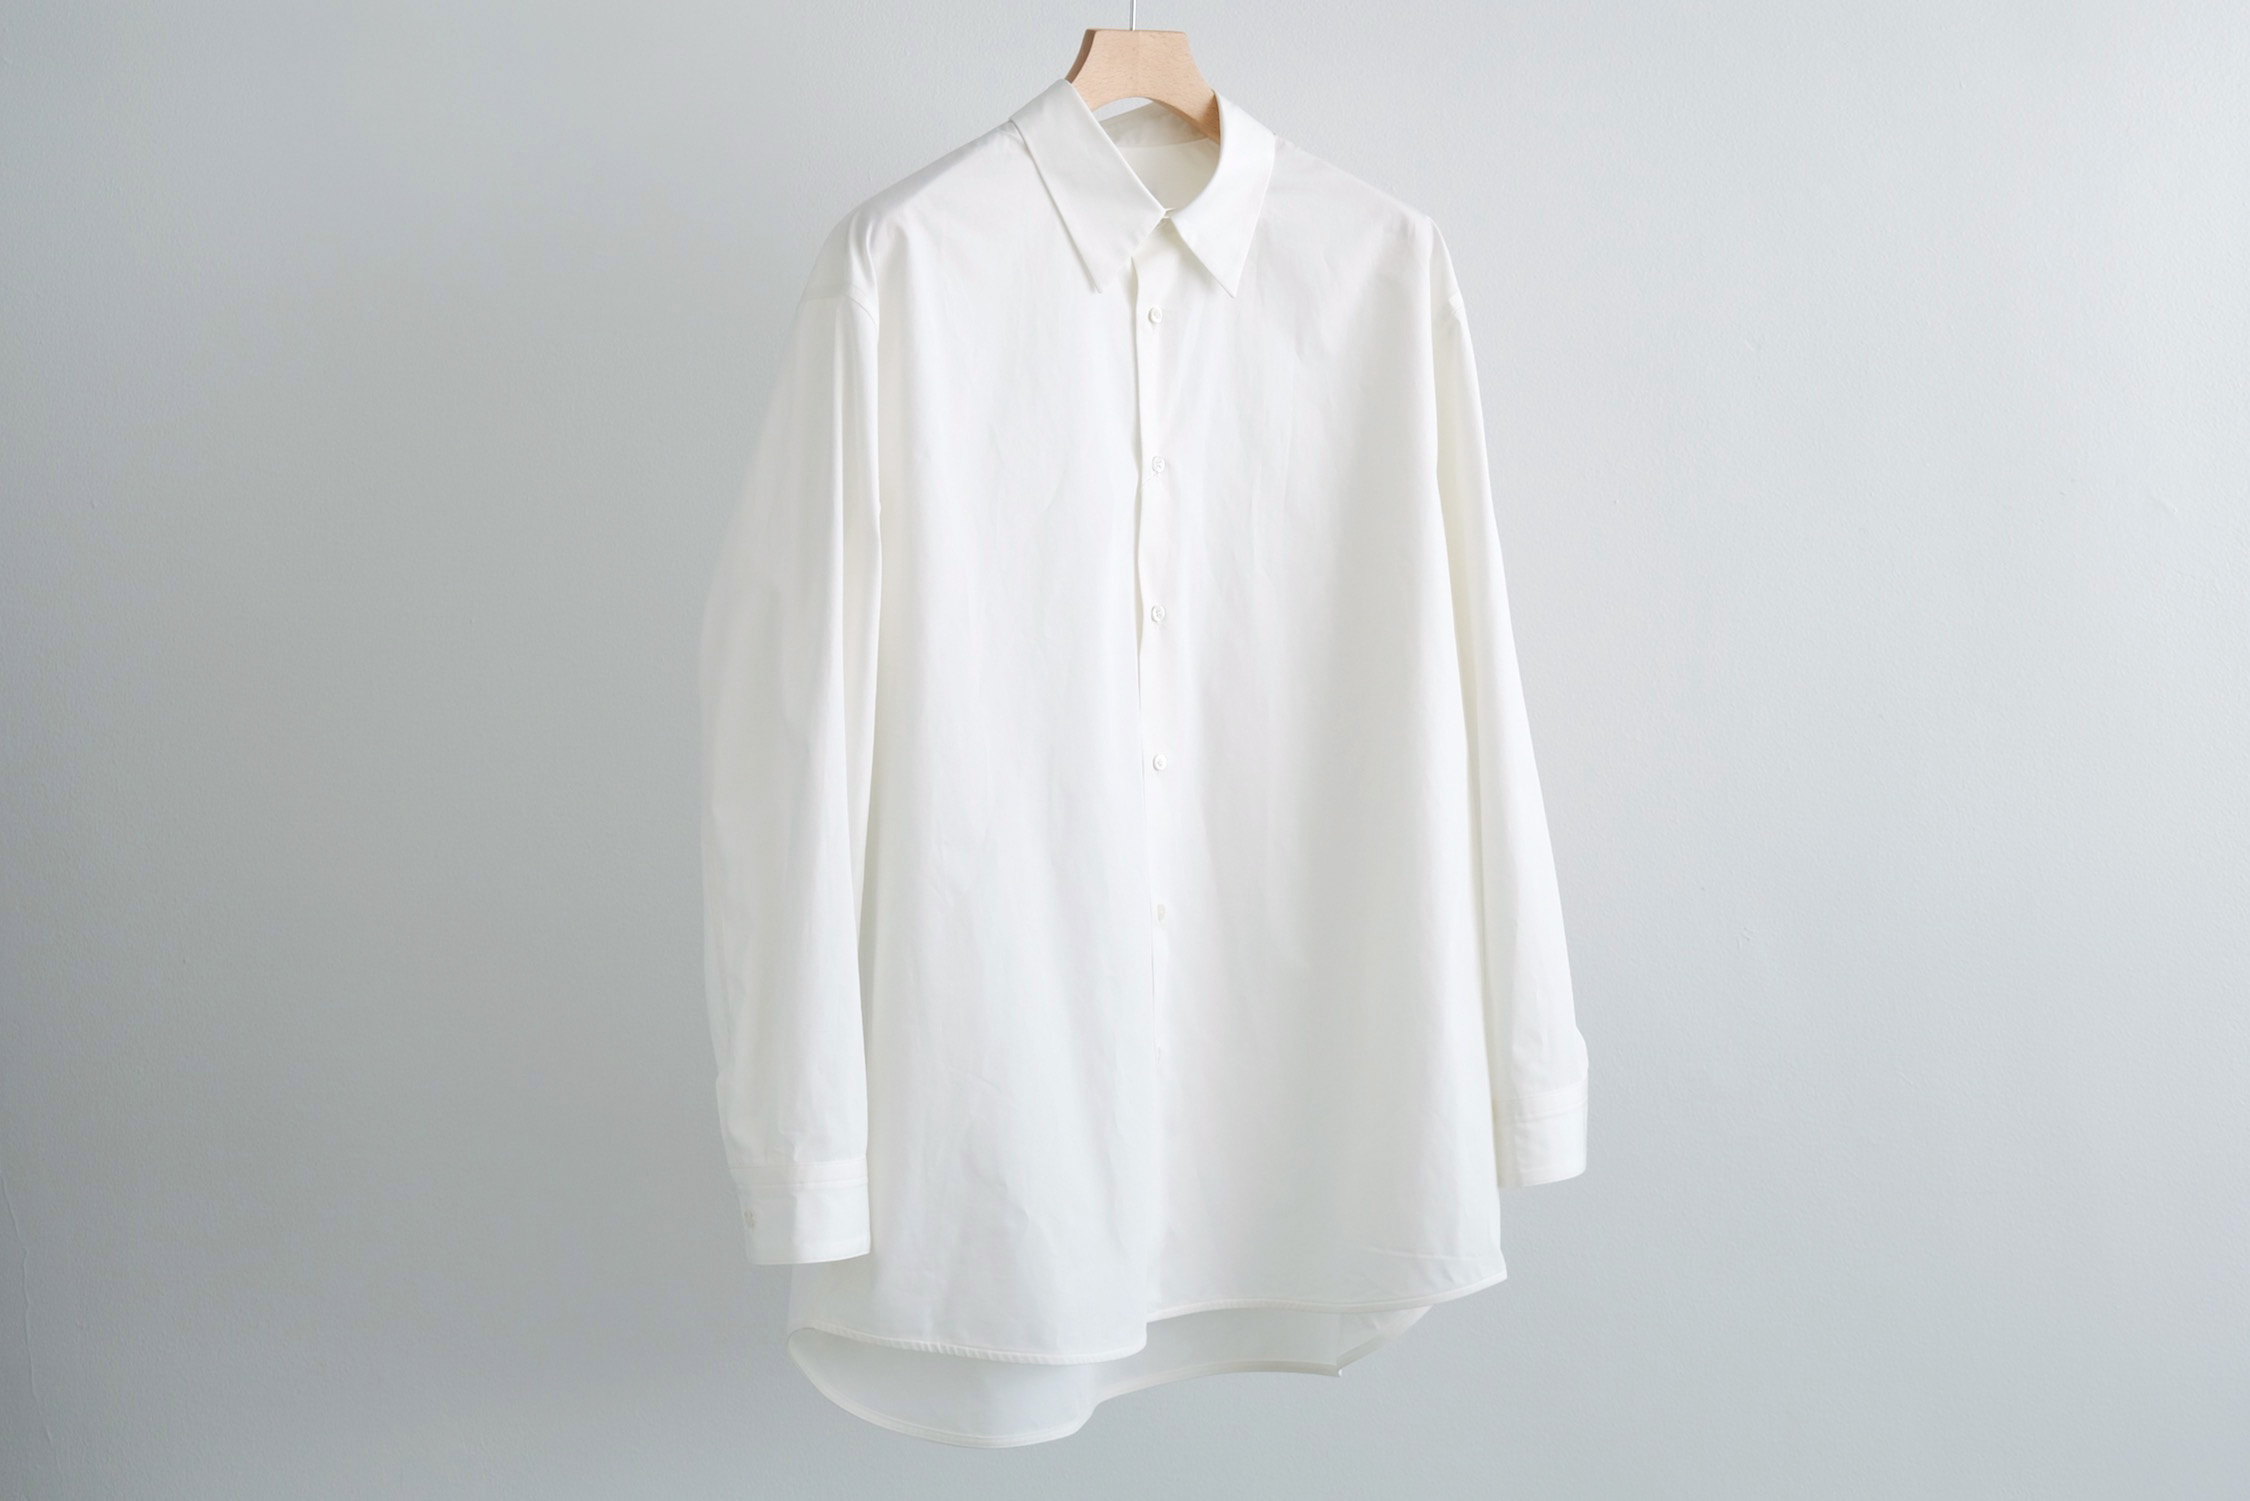 CLEAR HEAVY BROAD OVERSIZED SHIRTS | WUNDER